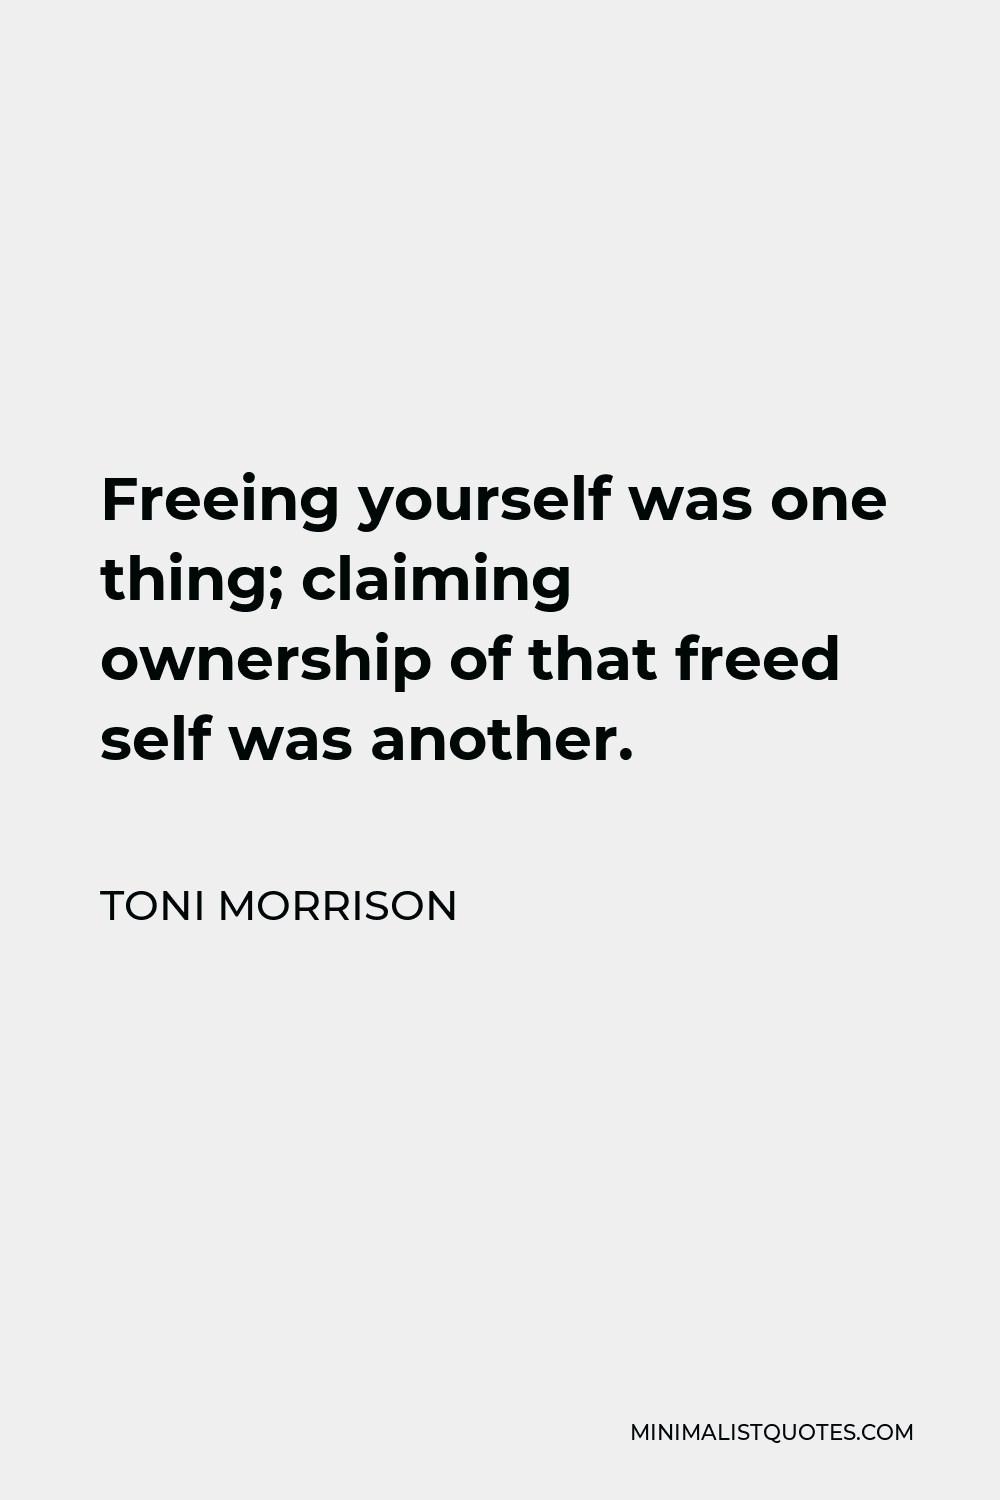 Toni Morrison Quote - Freeing yourself was one thing; claiming ownership of that freed self was another.